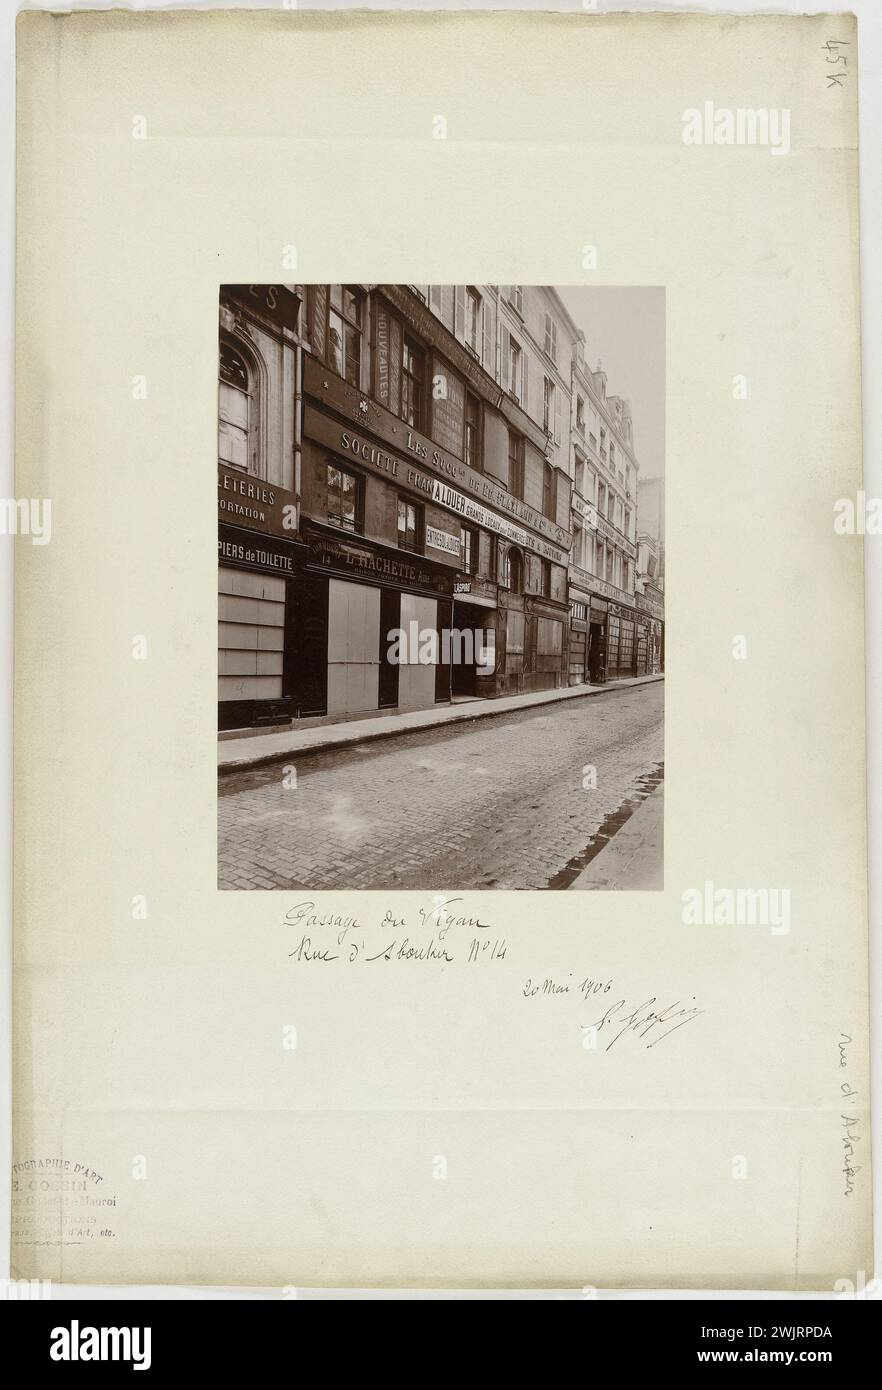 Starting of the publishing house L. Hachette, passage from Vigan, 14 rue d'Aboukir, Paris (2nd arr.). Photograph by E. Gossin. May 20, 1906. Paris, Carnavalet museum. 99890-1 IIEEEEIE IIE II 2ME 2E 2 ARRONDISSEMENT Stock Photo